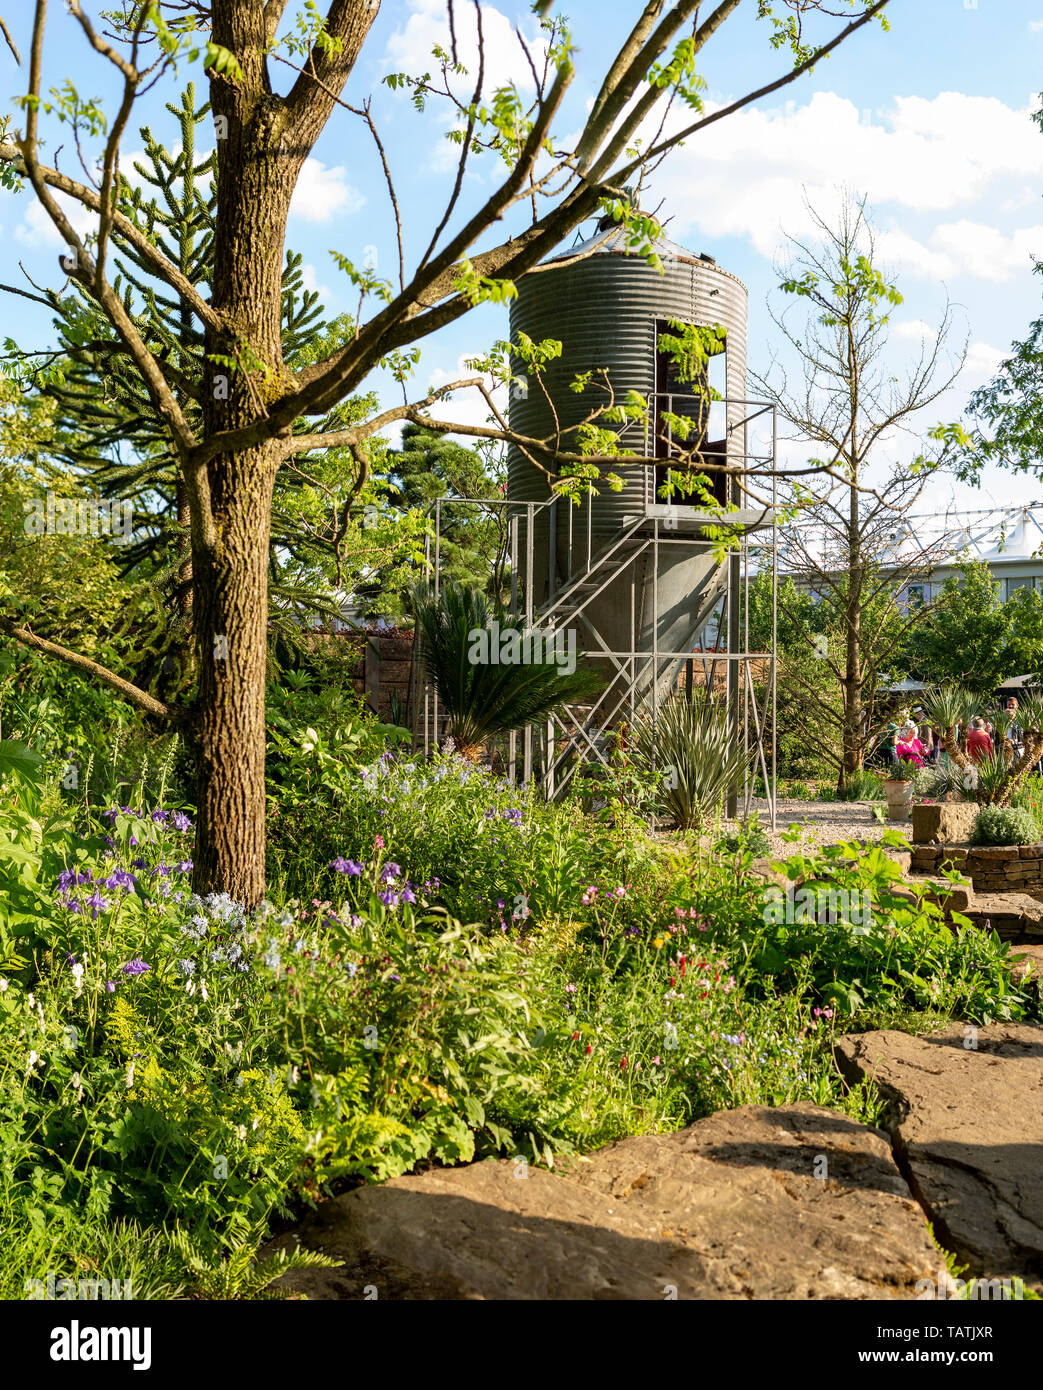 The Resilience Garden. RHS Chelsea Flower Show 2019 Stock Photo